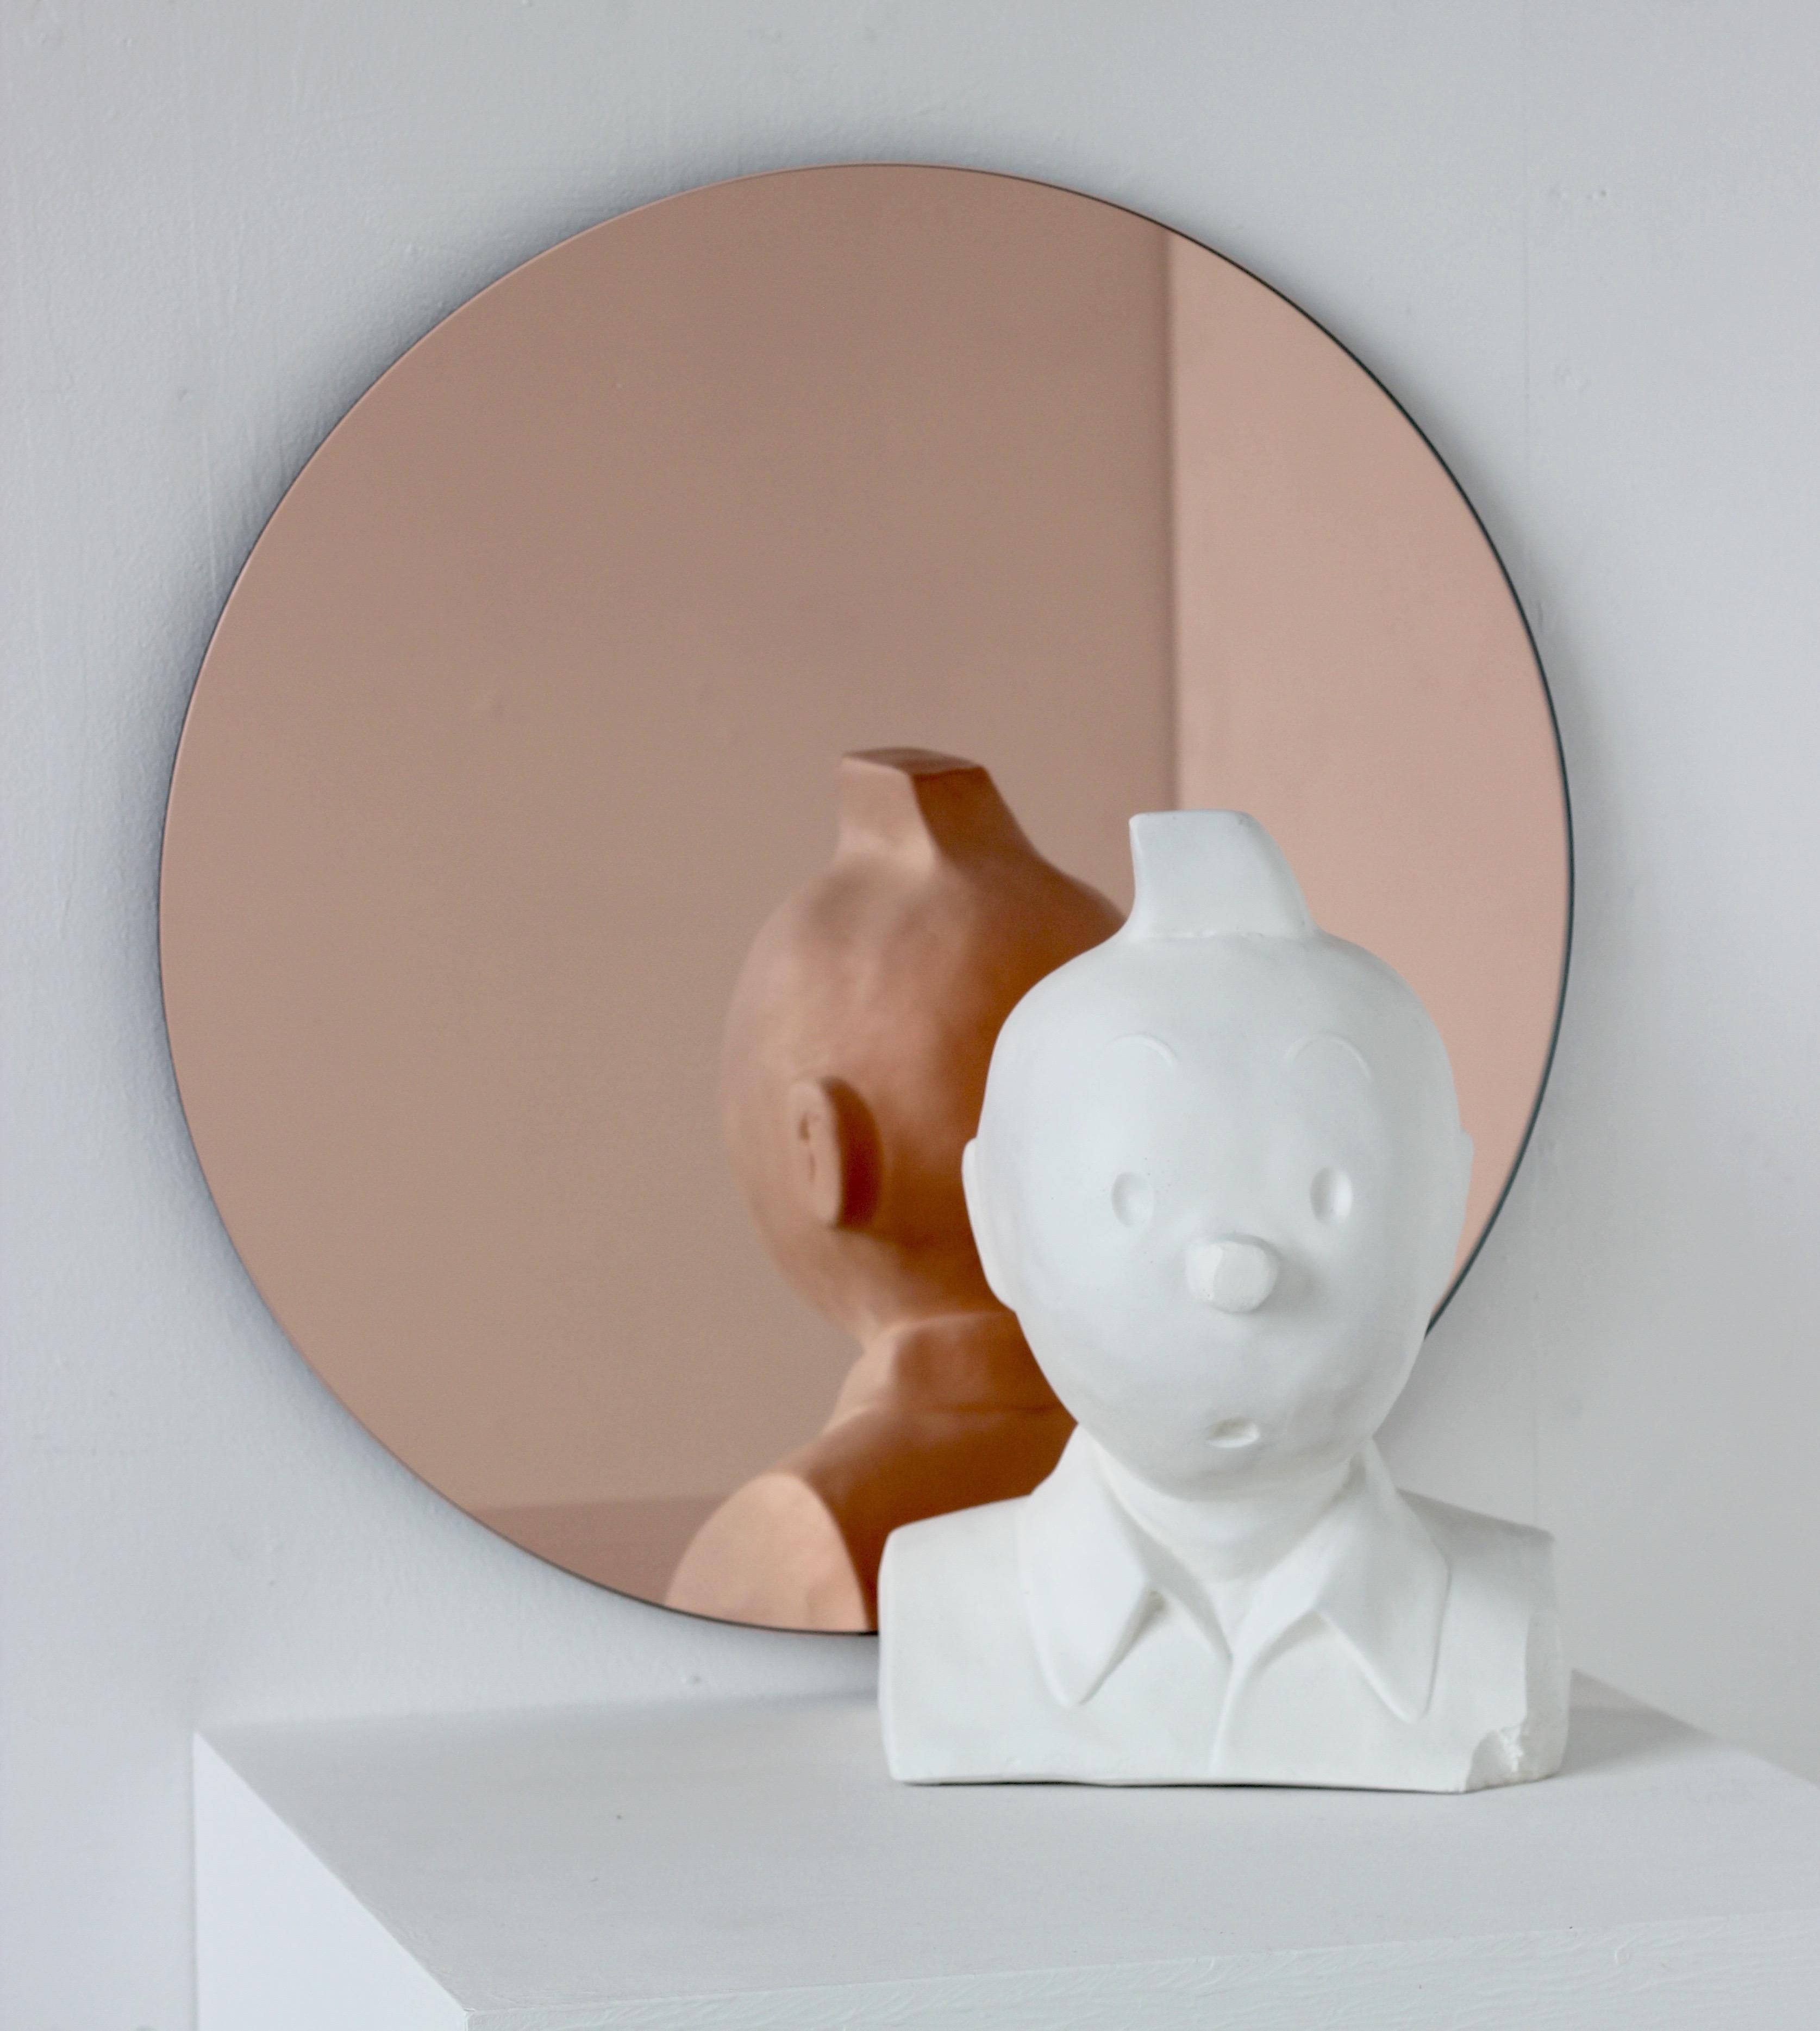 Charming and minimalist rose gold / peach tinted round frameless Orbis™ mirror with a floating effect. Quality design that ensures the mirror sits perfectly parallel to the wall. Designed and made in London, UK.

Fitted with professional plates not